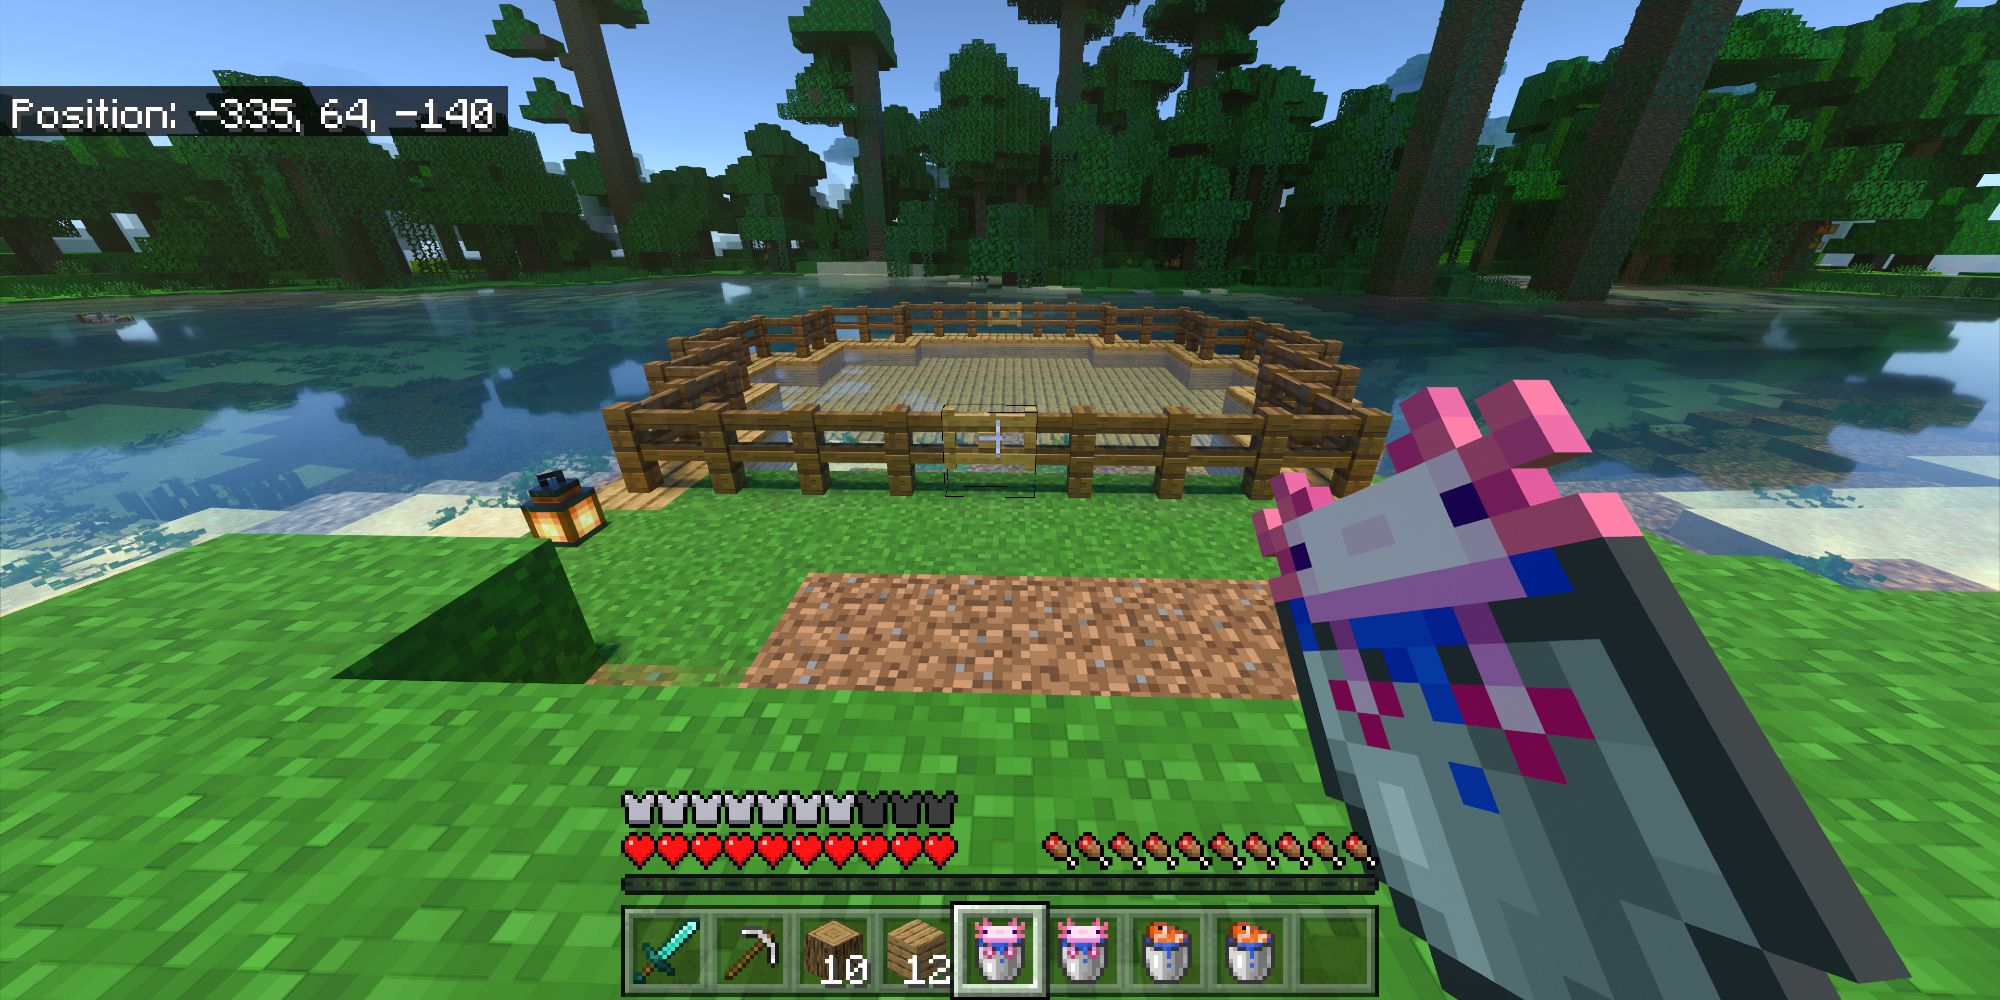 Minecraft axolotl guide – how to find, breed, and tame